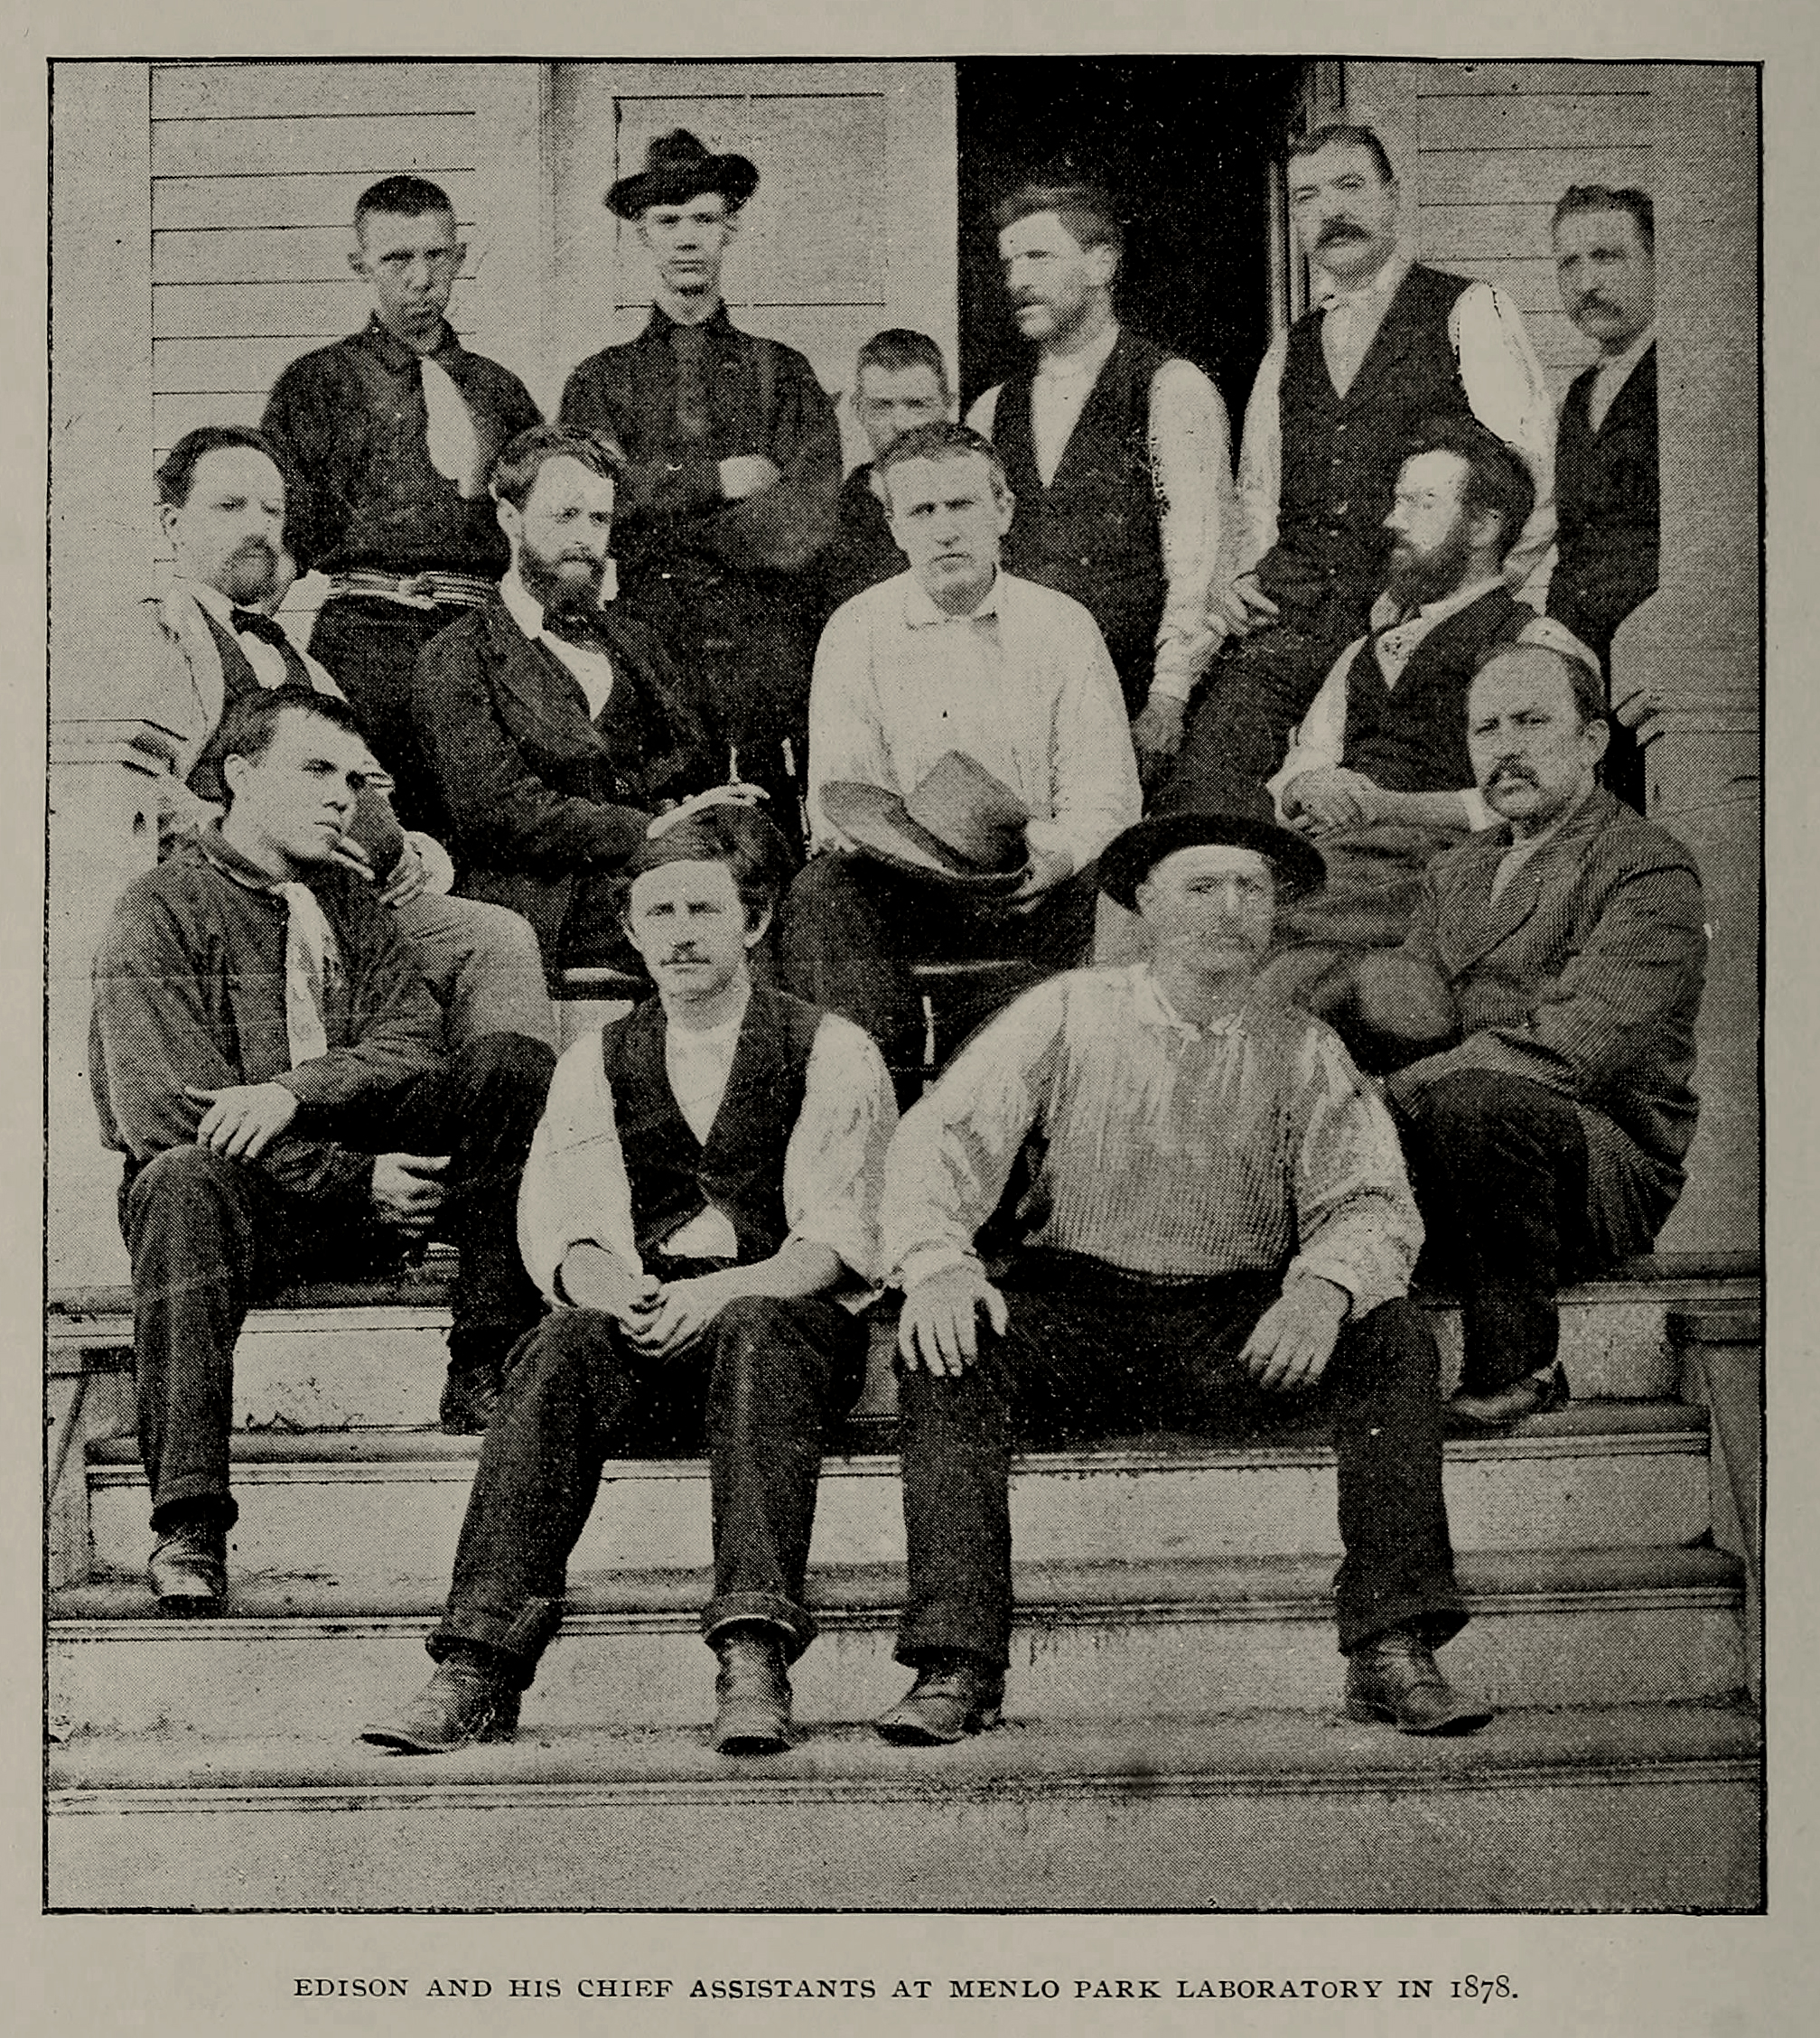 Thomas Edison with Chief Assistants Menlo Park in 1878